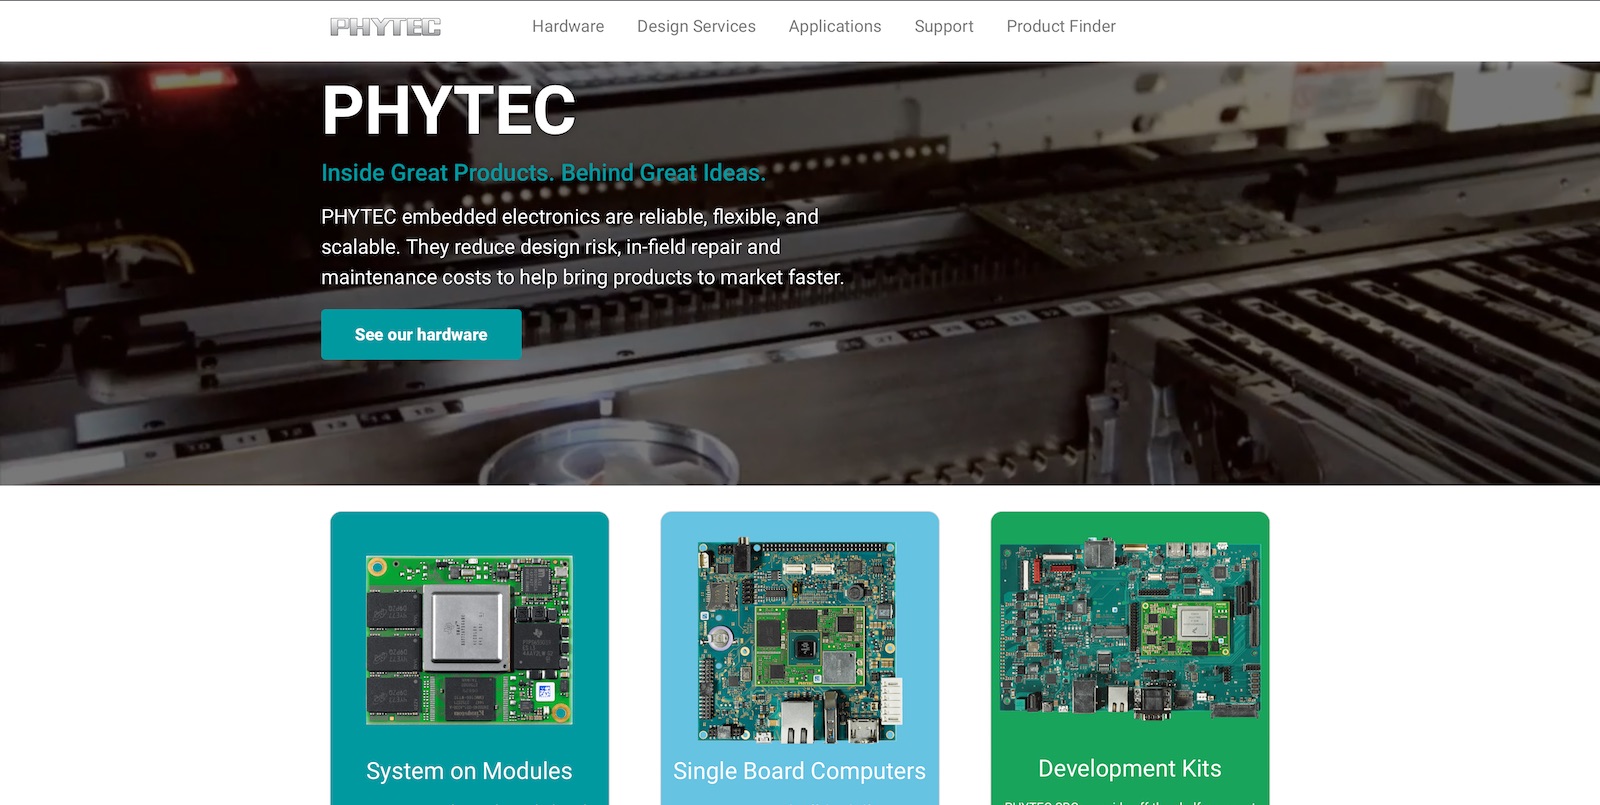 PHYTEC homepage overview